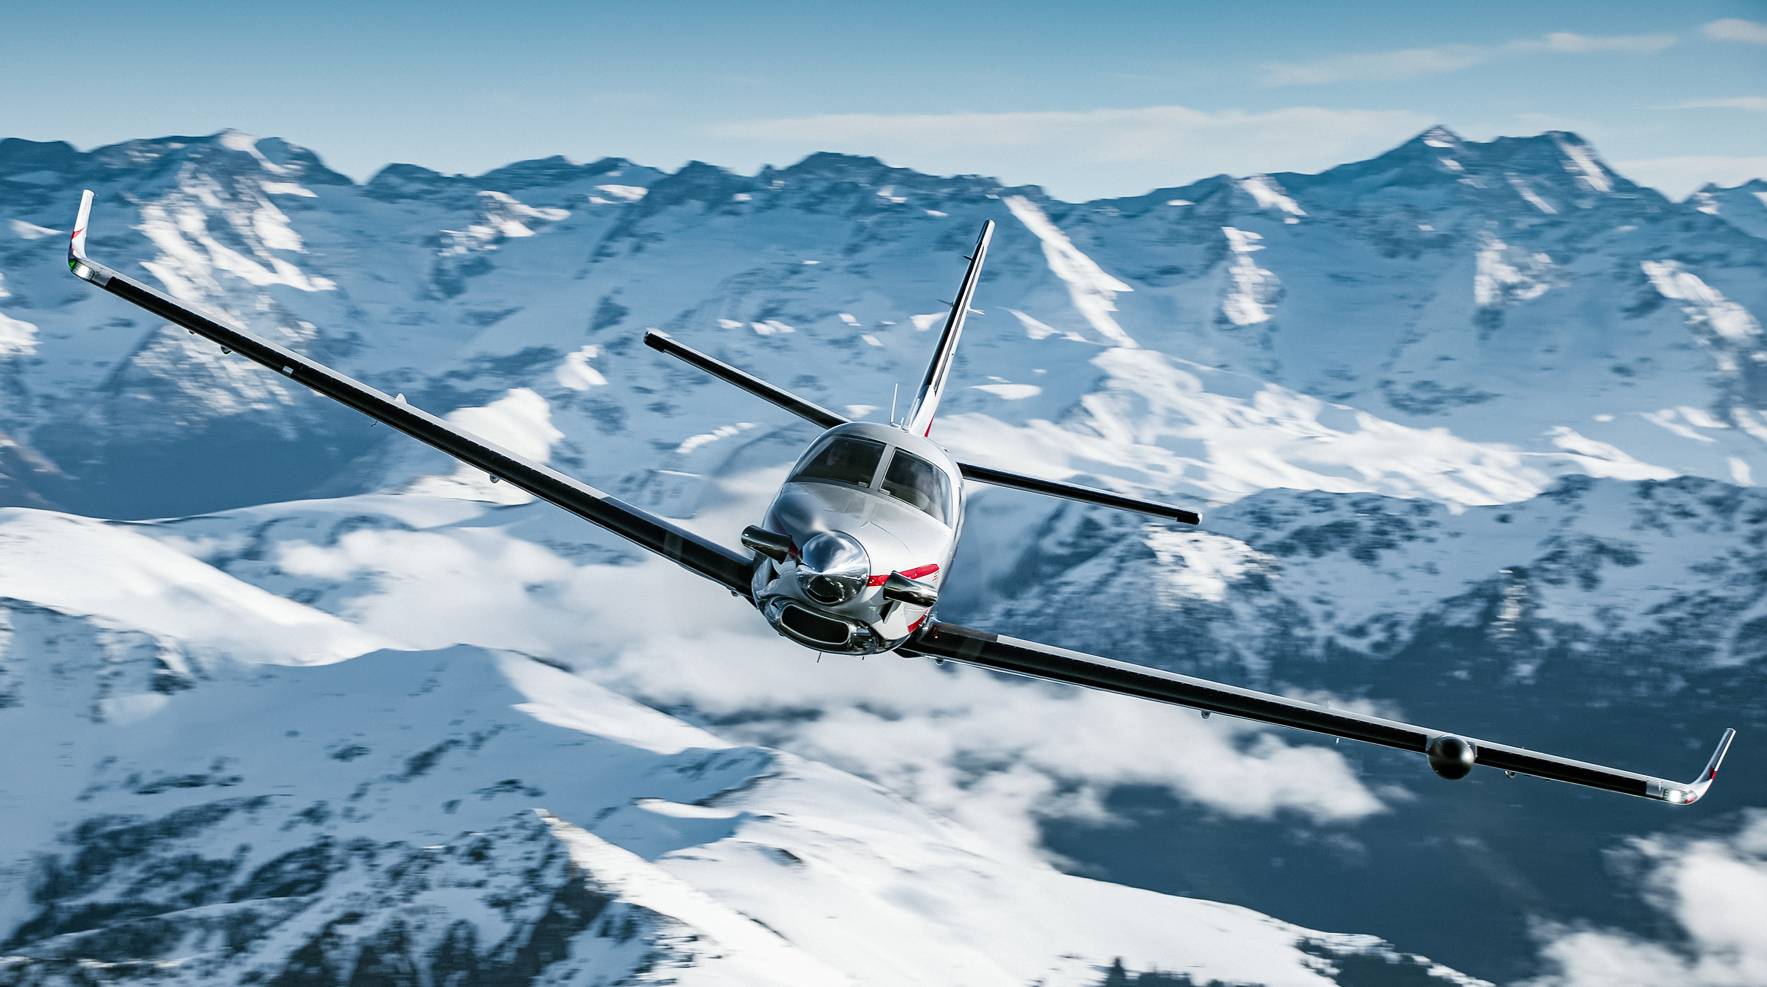 Daher delivers the first TBM 960 very efficient turboprop aircraft to a Swiss-based customer